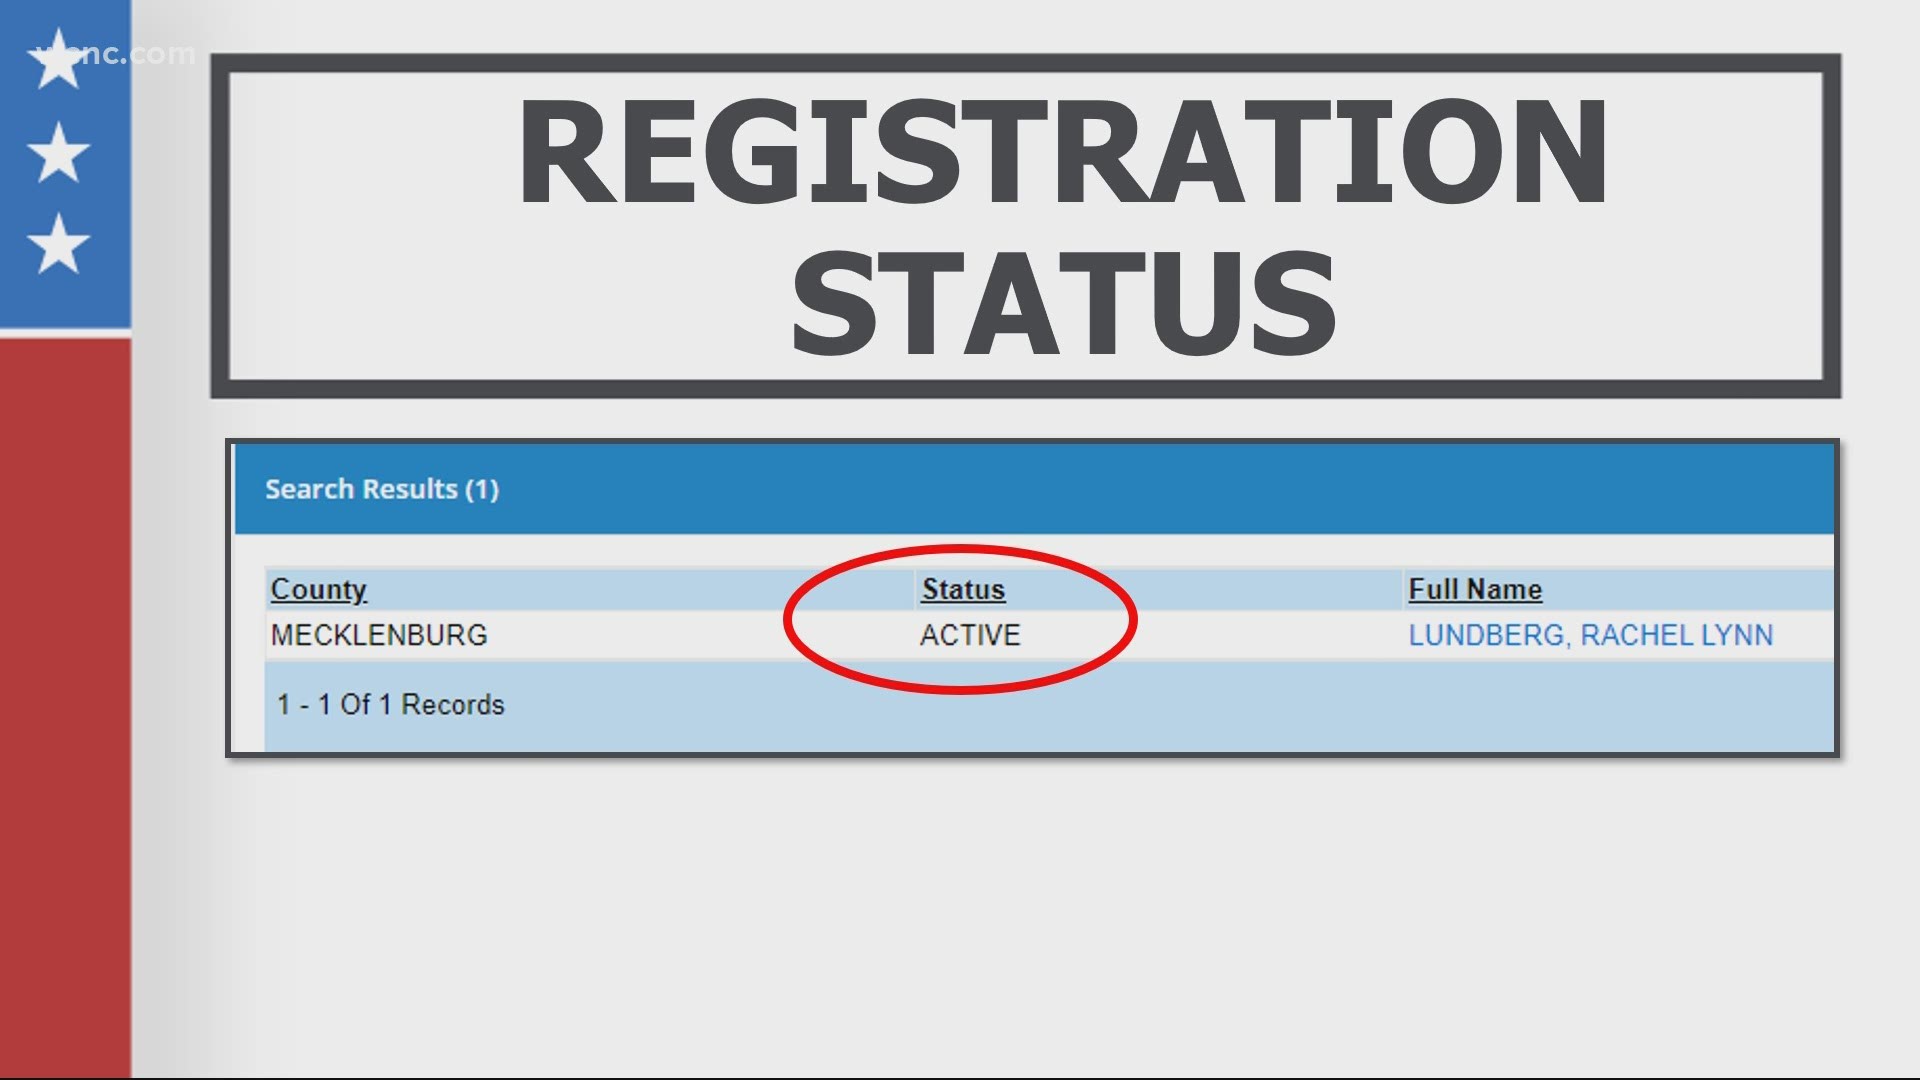 It's very simple to check both North Carolina and South Carolina's election board websites for your registration status.